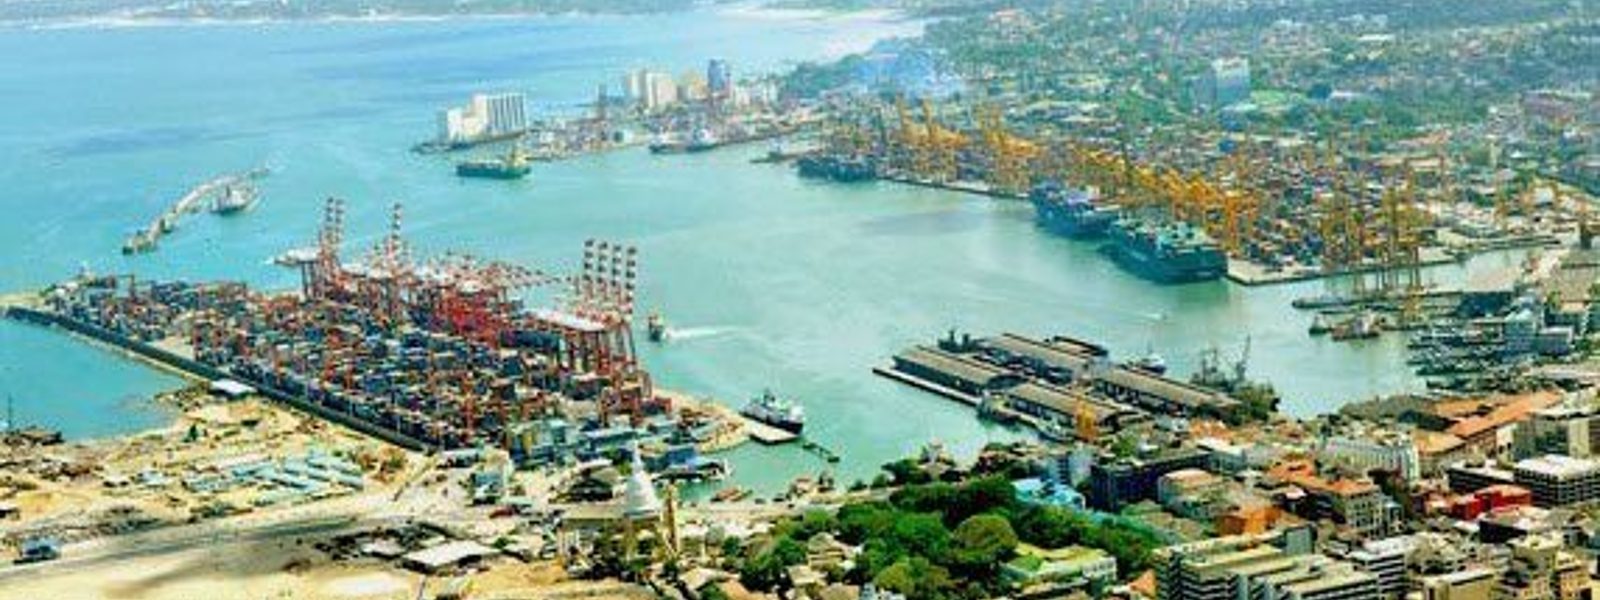 Trade Unions call for reversal of 13-acre port land lease